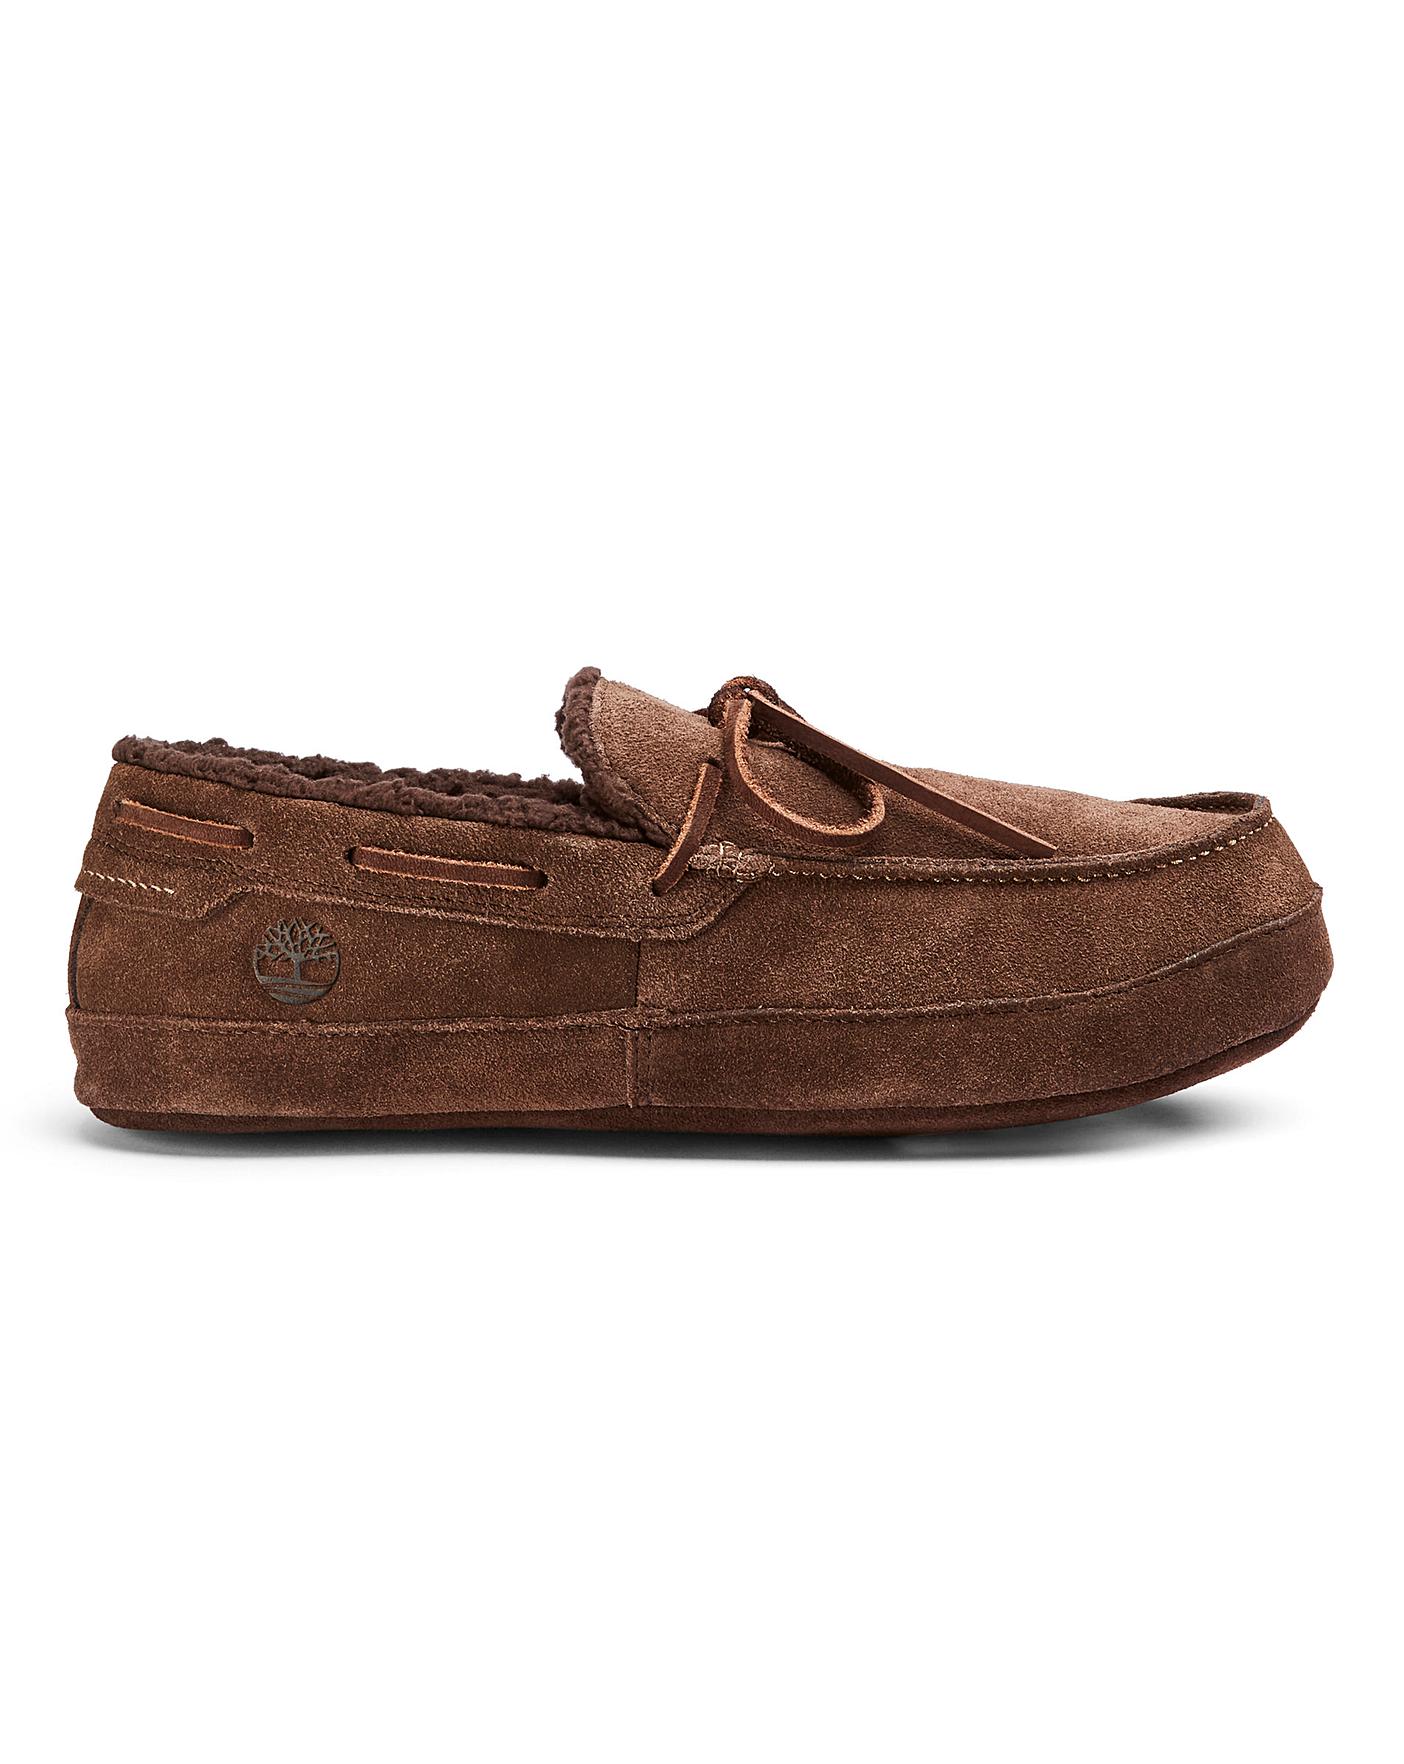 timberland moccasin slippers